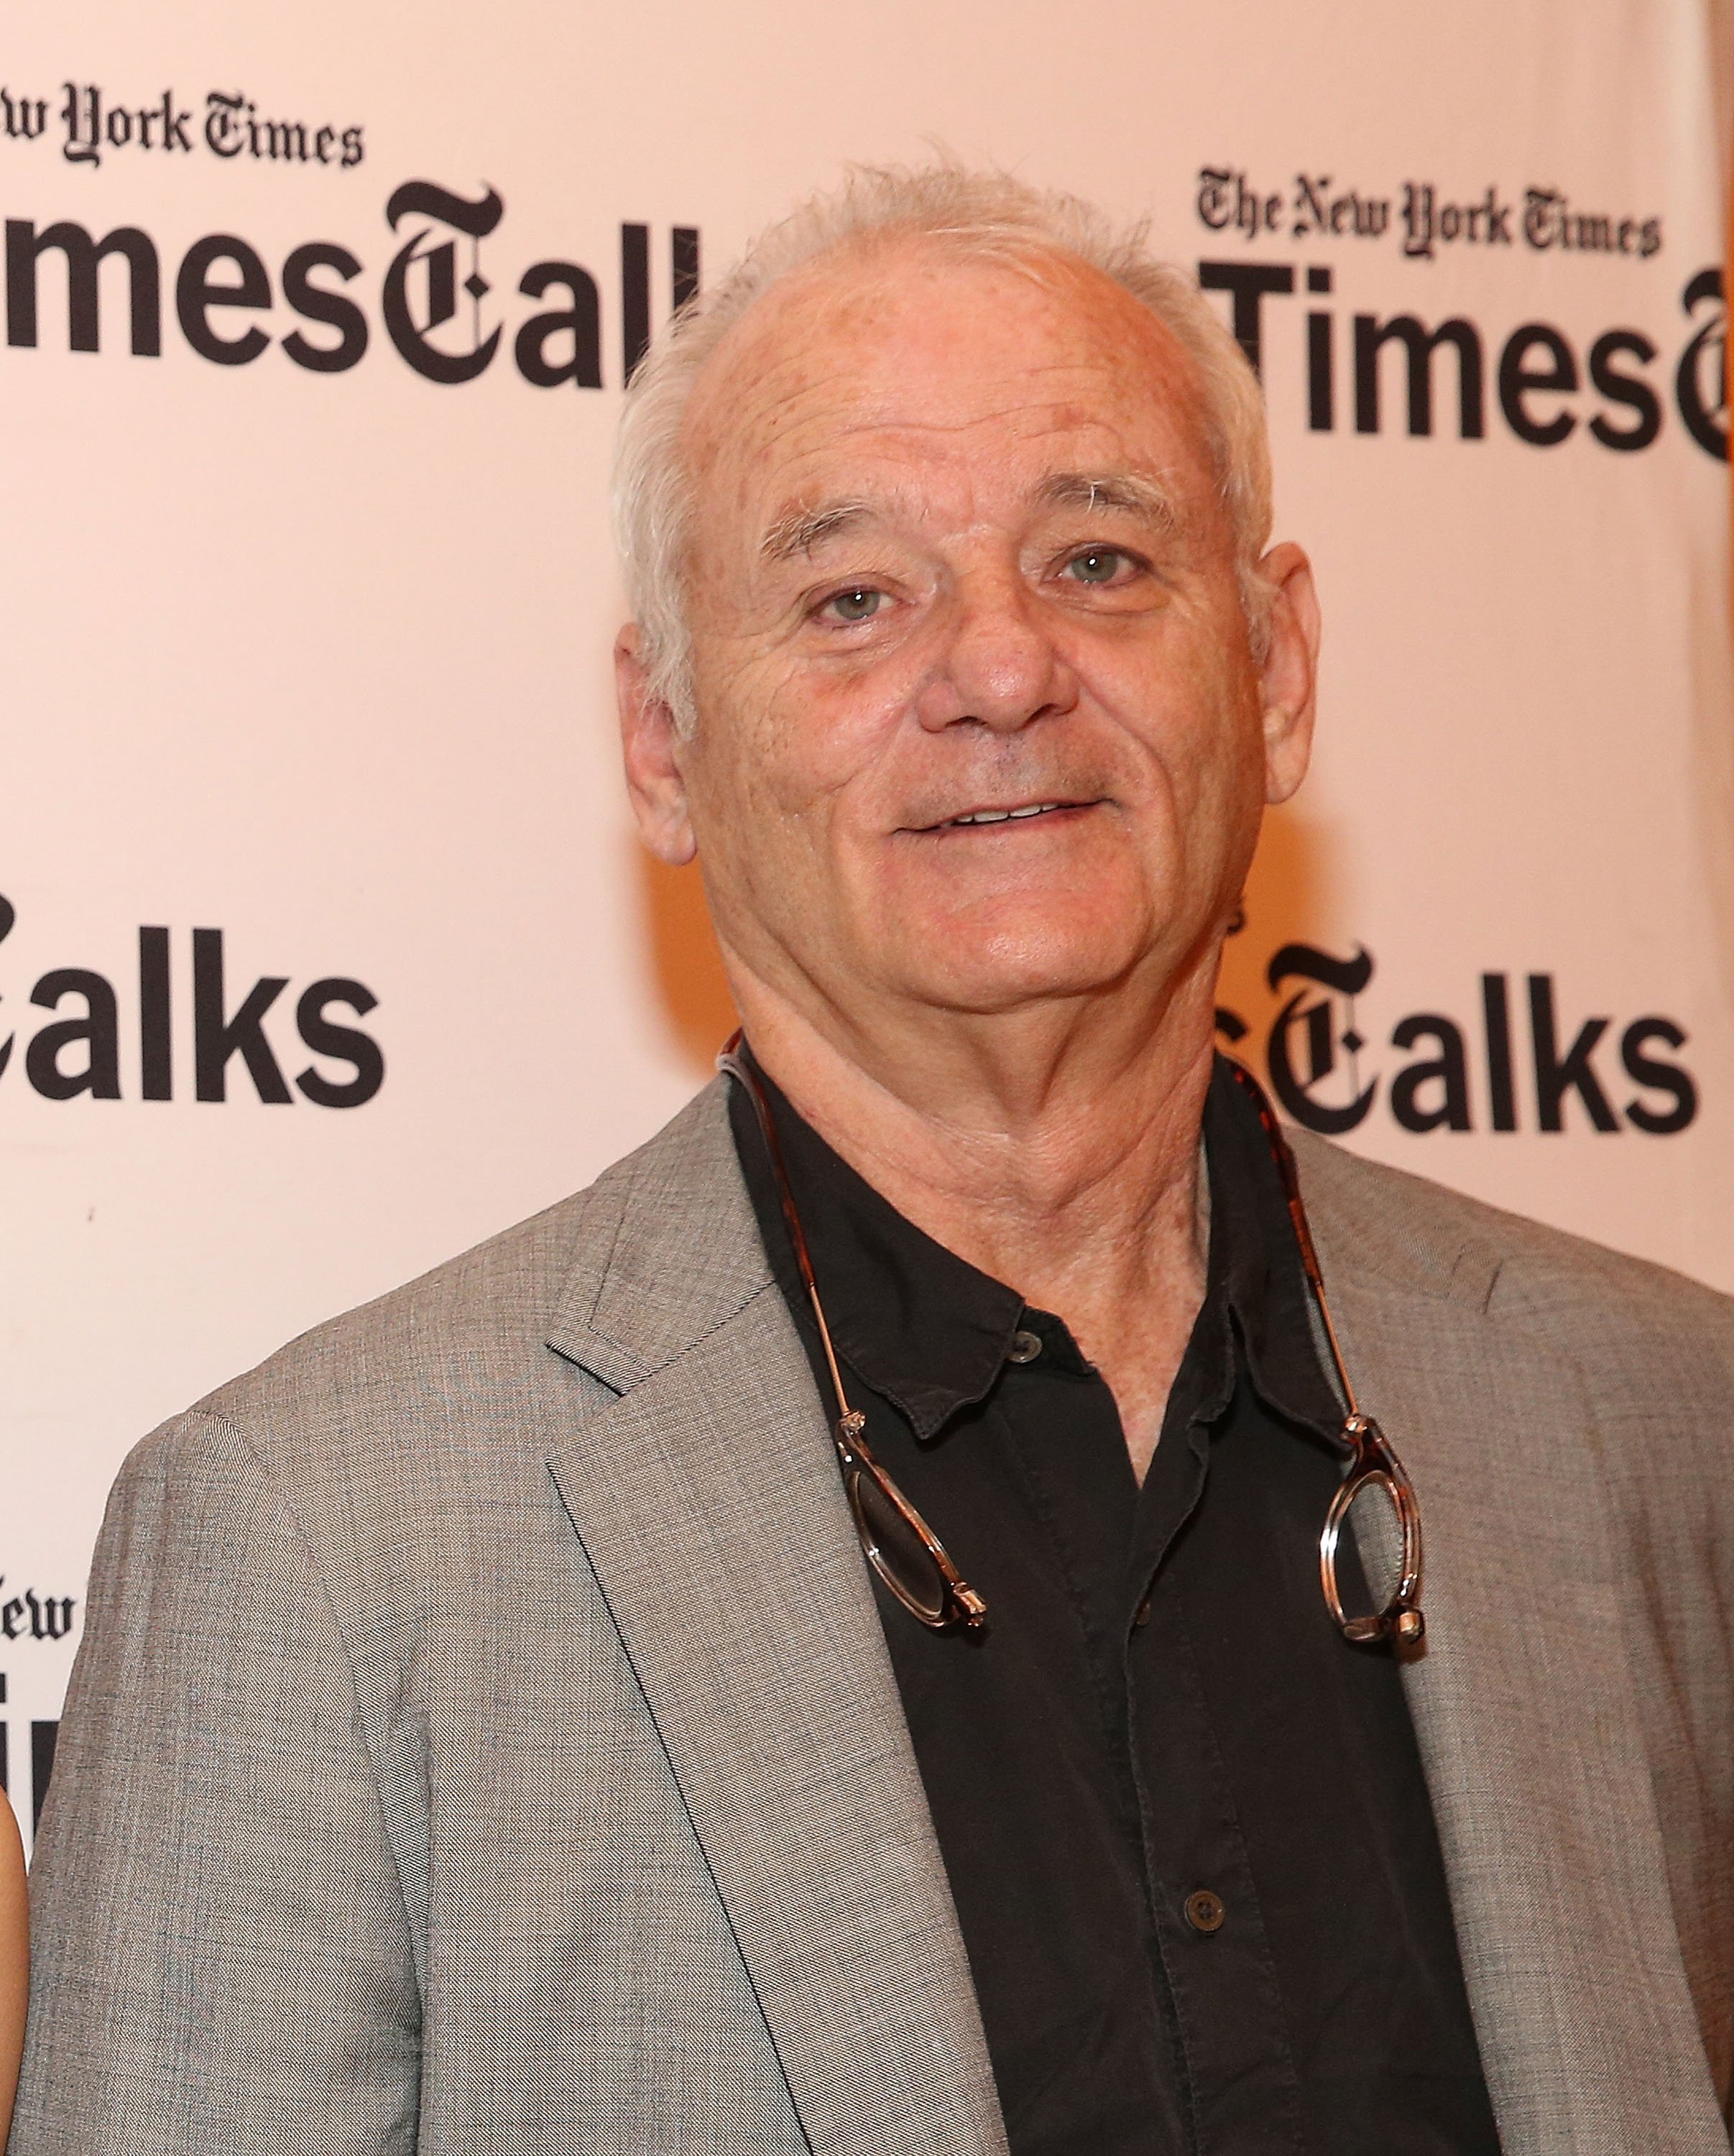 Bill Murray at a speaking engagement in New York in June 2017. | Photo: Getty Images